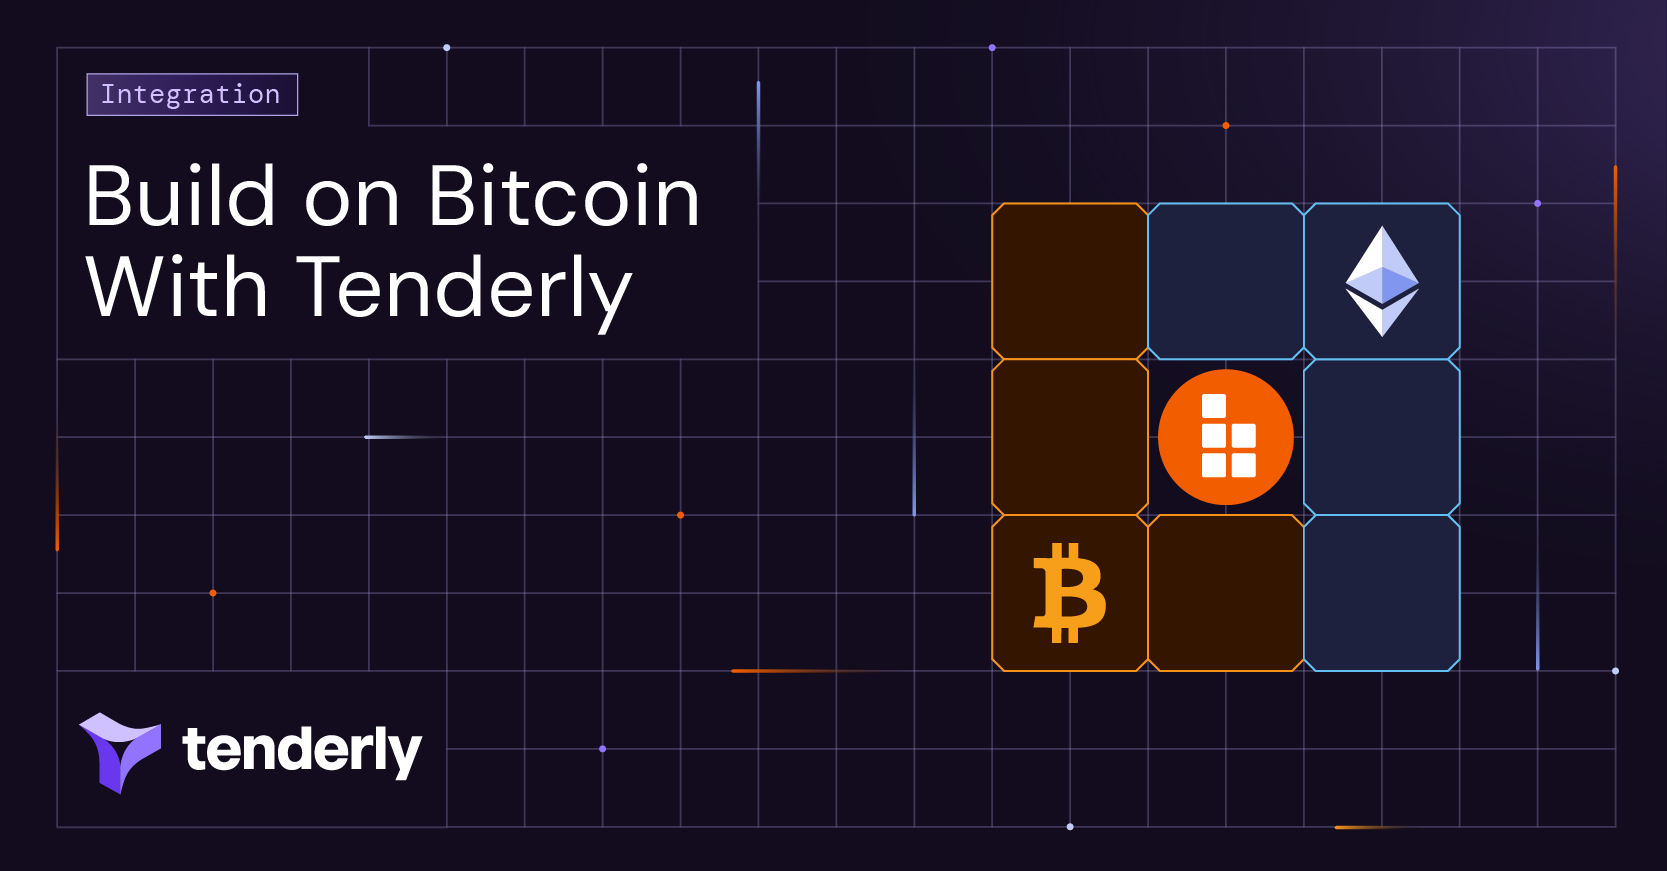 How the Tenderly-BOB Integration Helps You Build on Bitcoin